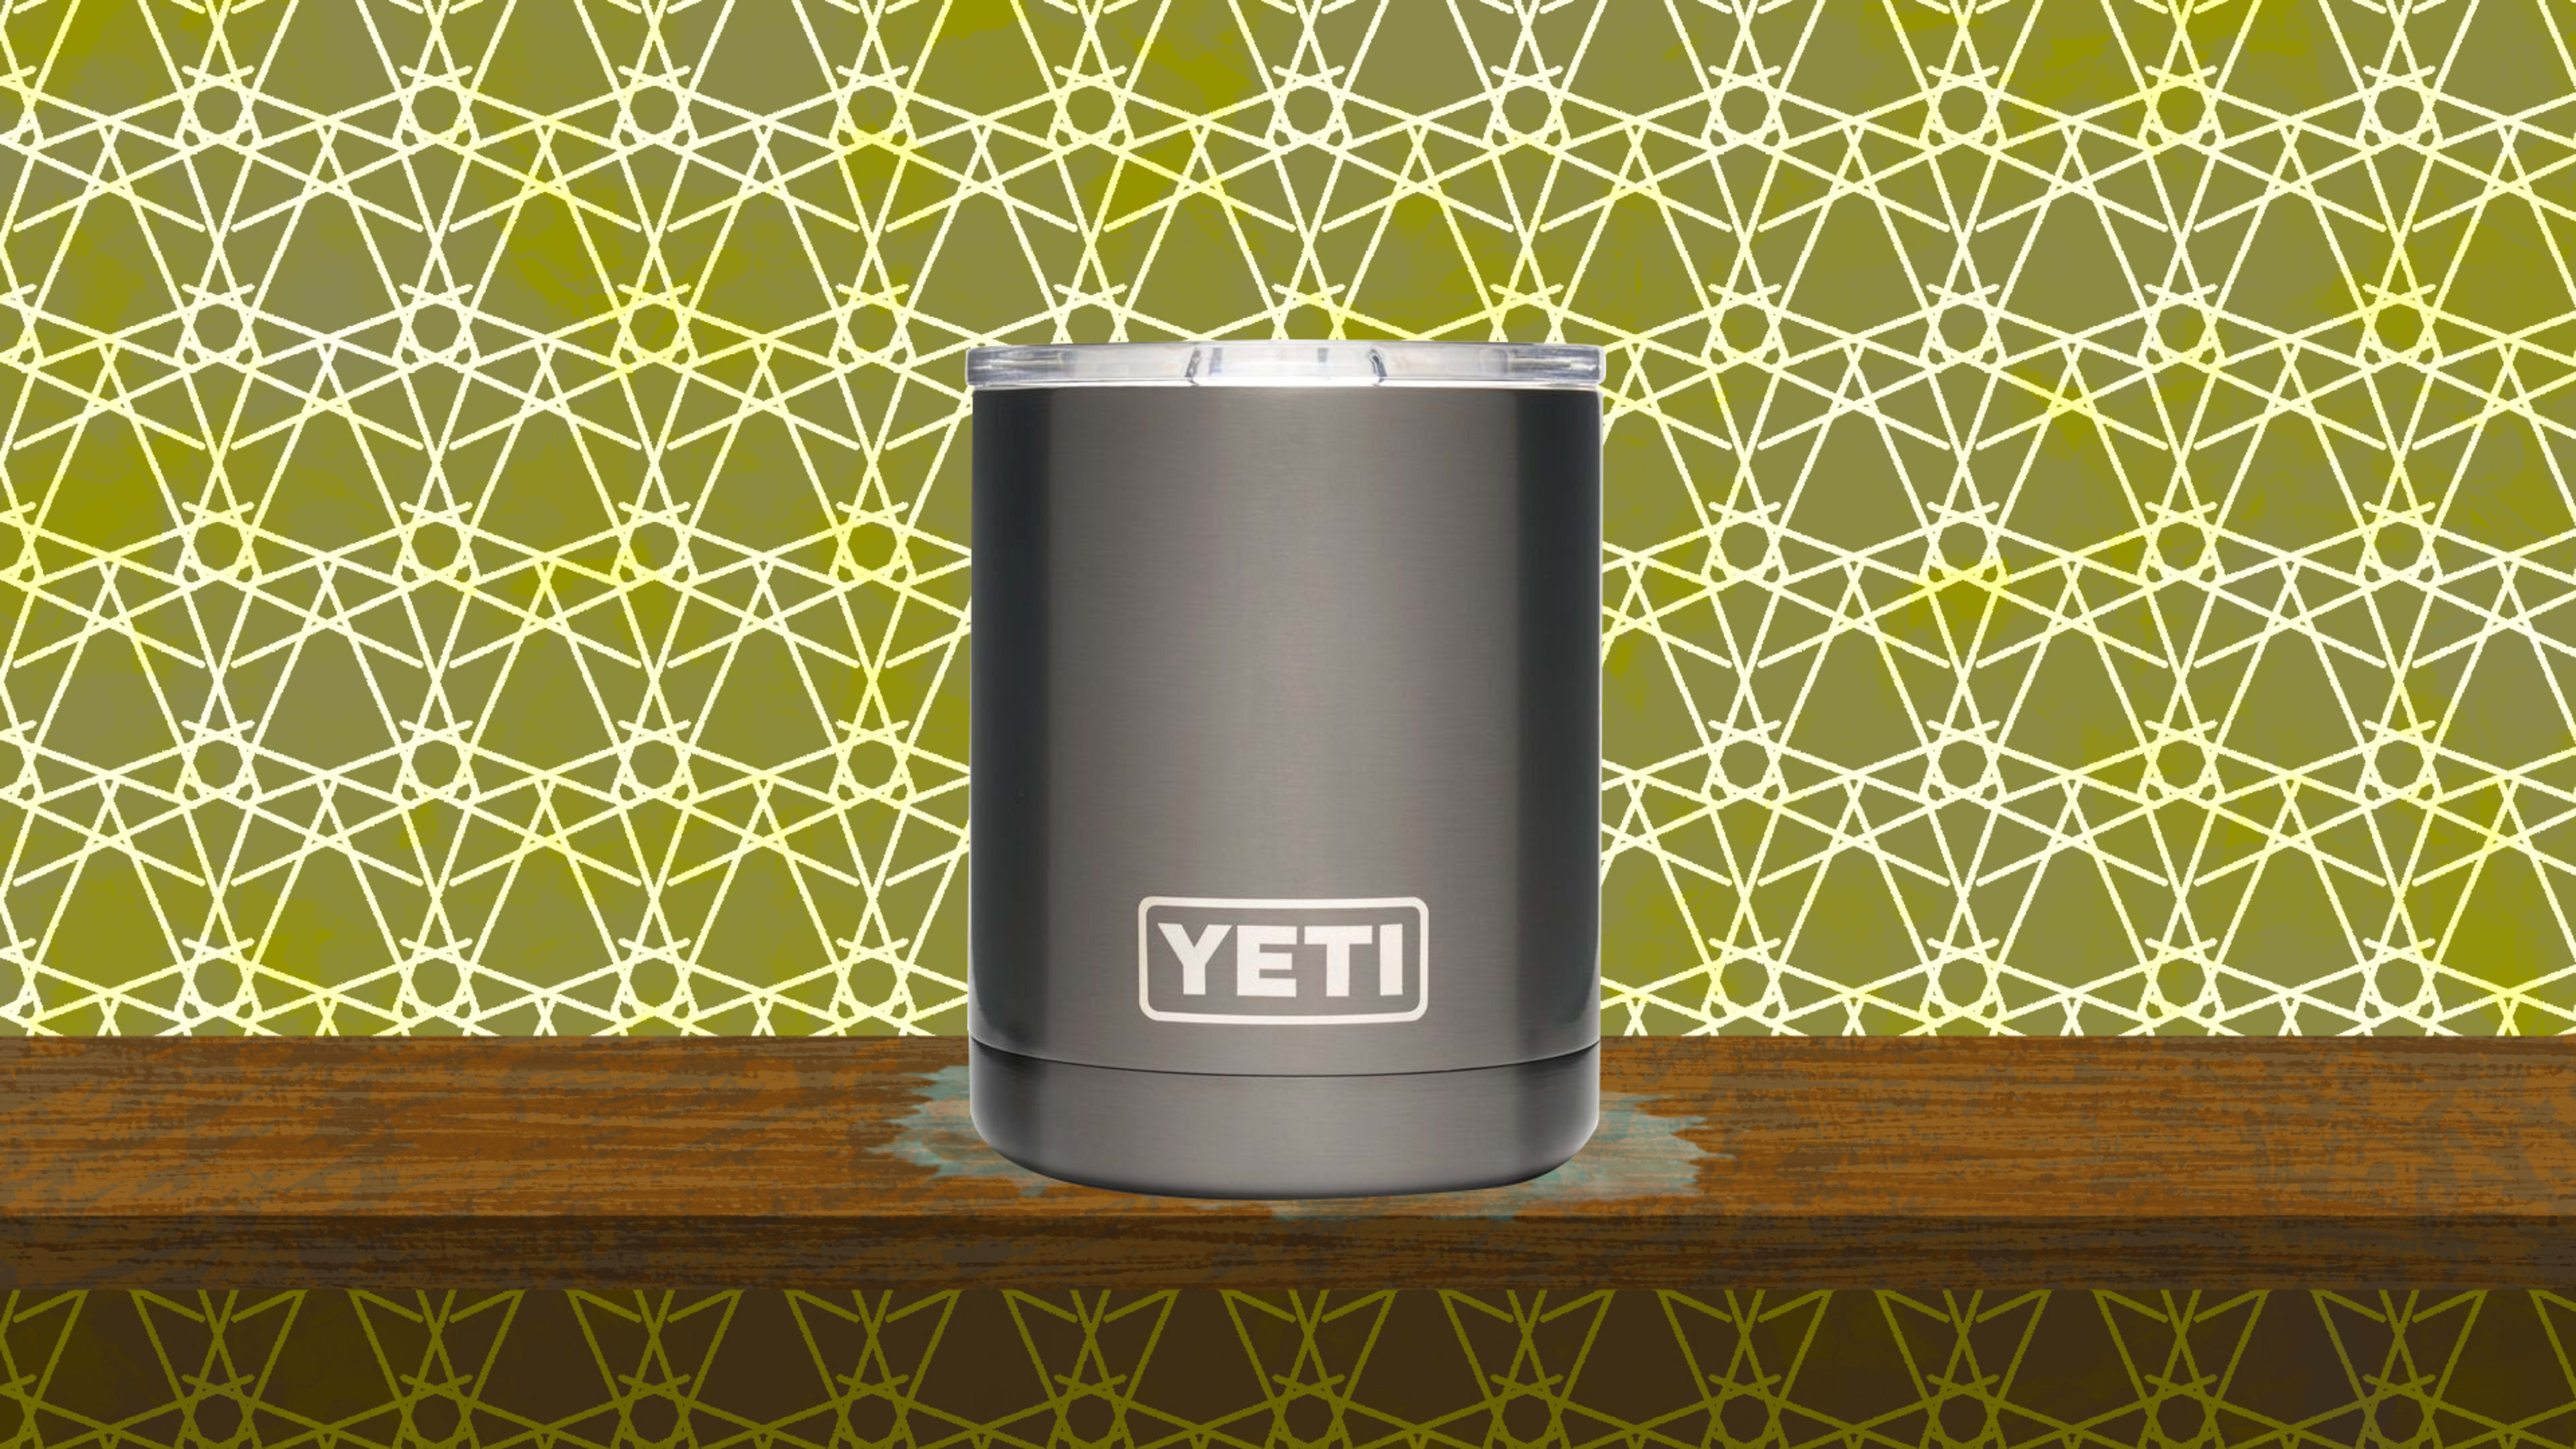 This $15 Yeti tumbler is the cup of kings and queens